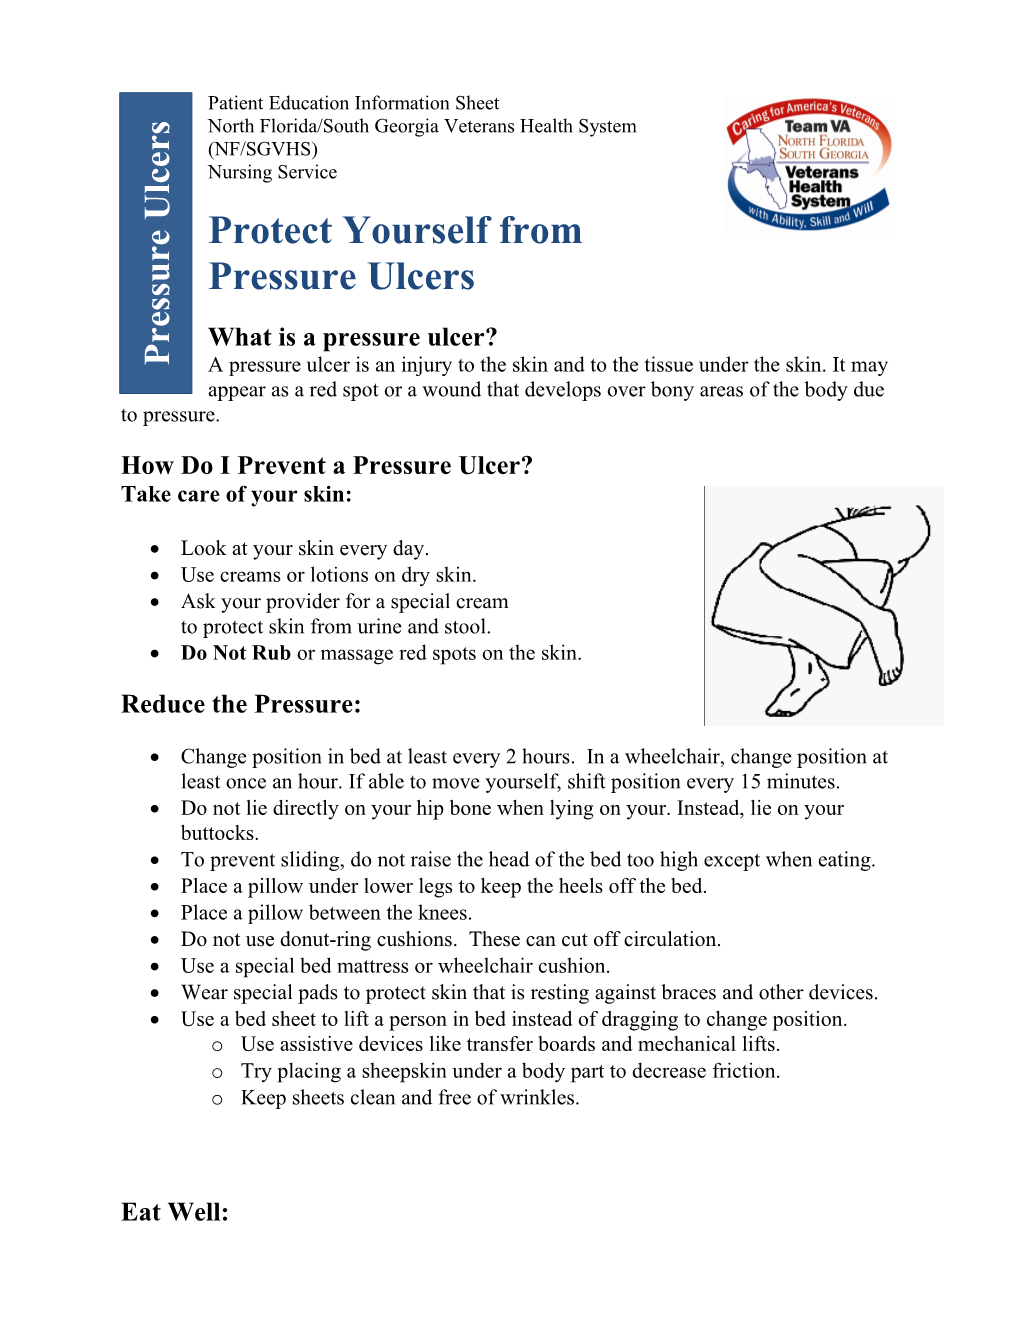 Protect Yourself from Pressure Ulcers